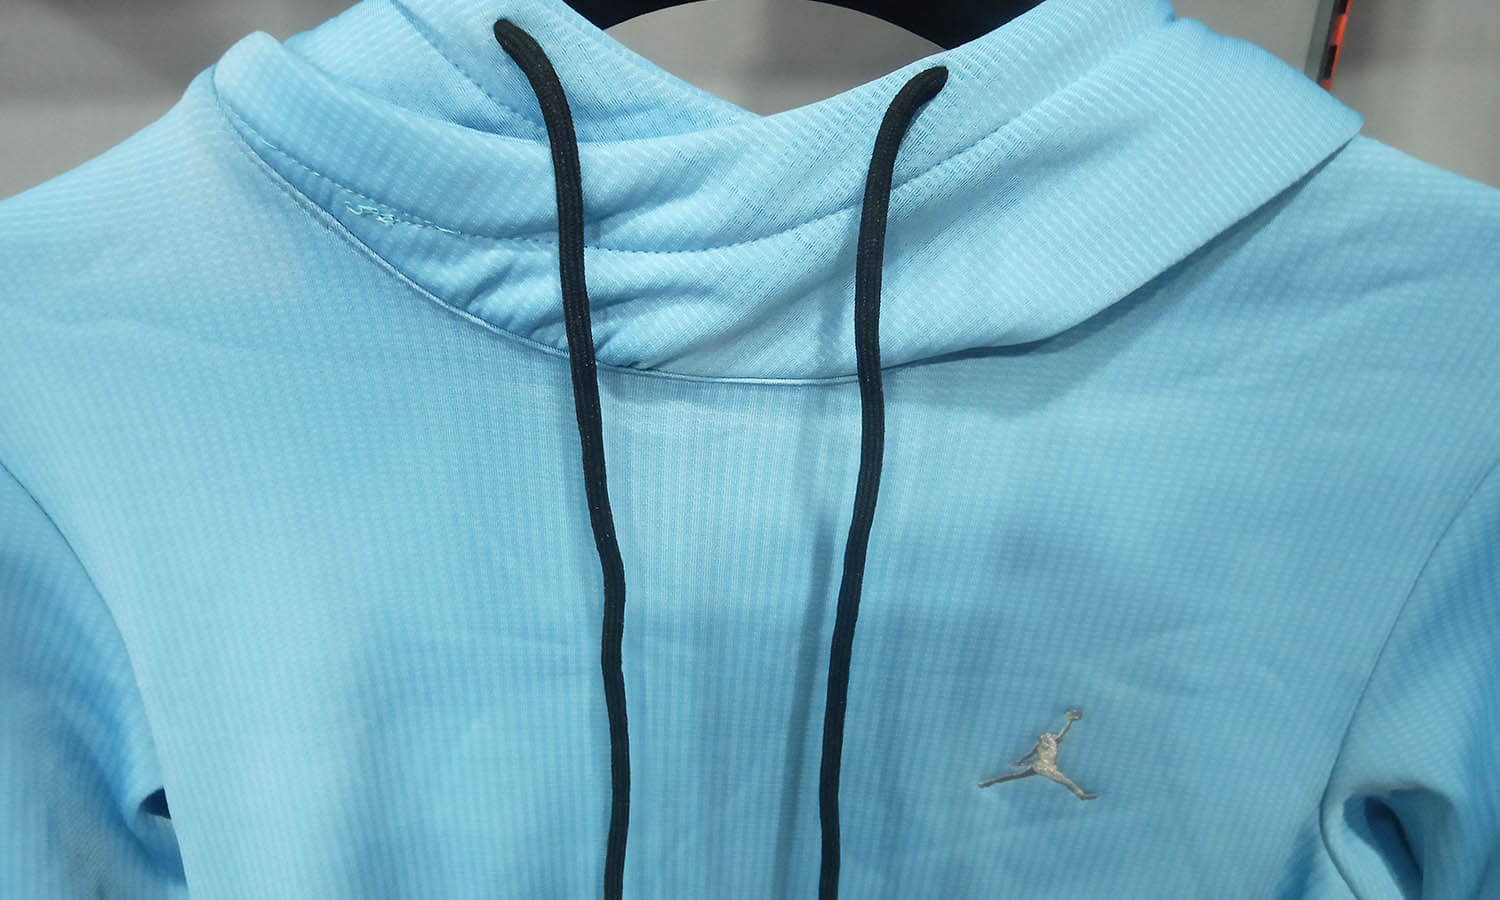 Jordan Cool Pullover hoodie For Winter(Soft & Stylish)